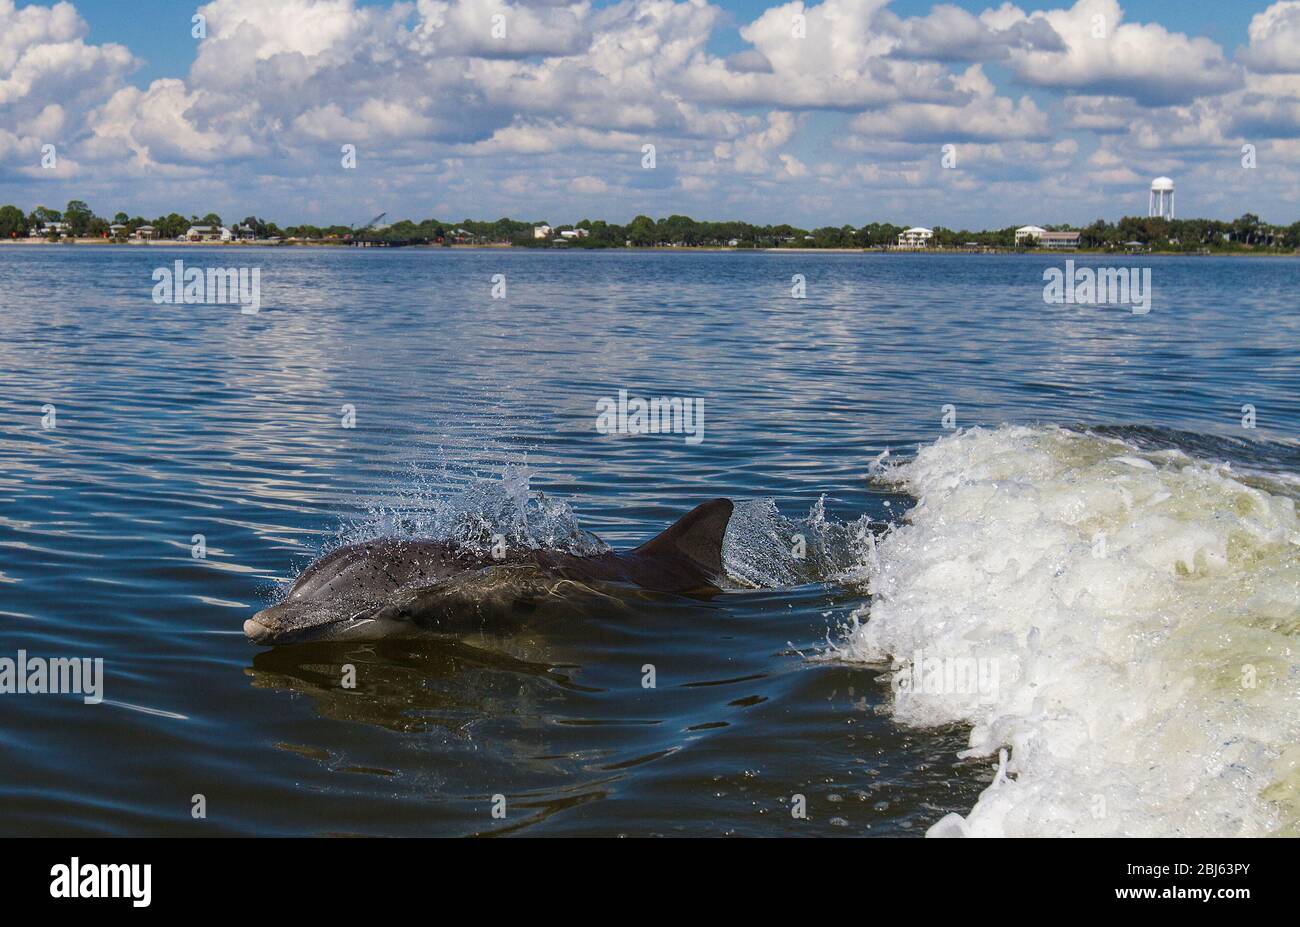 Bottle Nosed Dolphin swimming in a boats wake Stock Photo